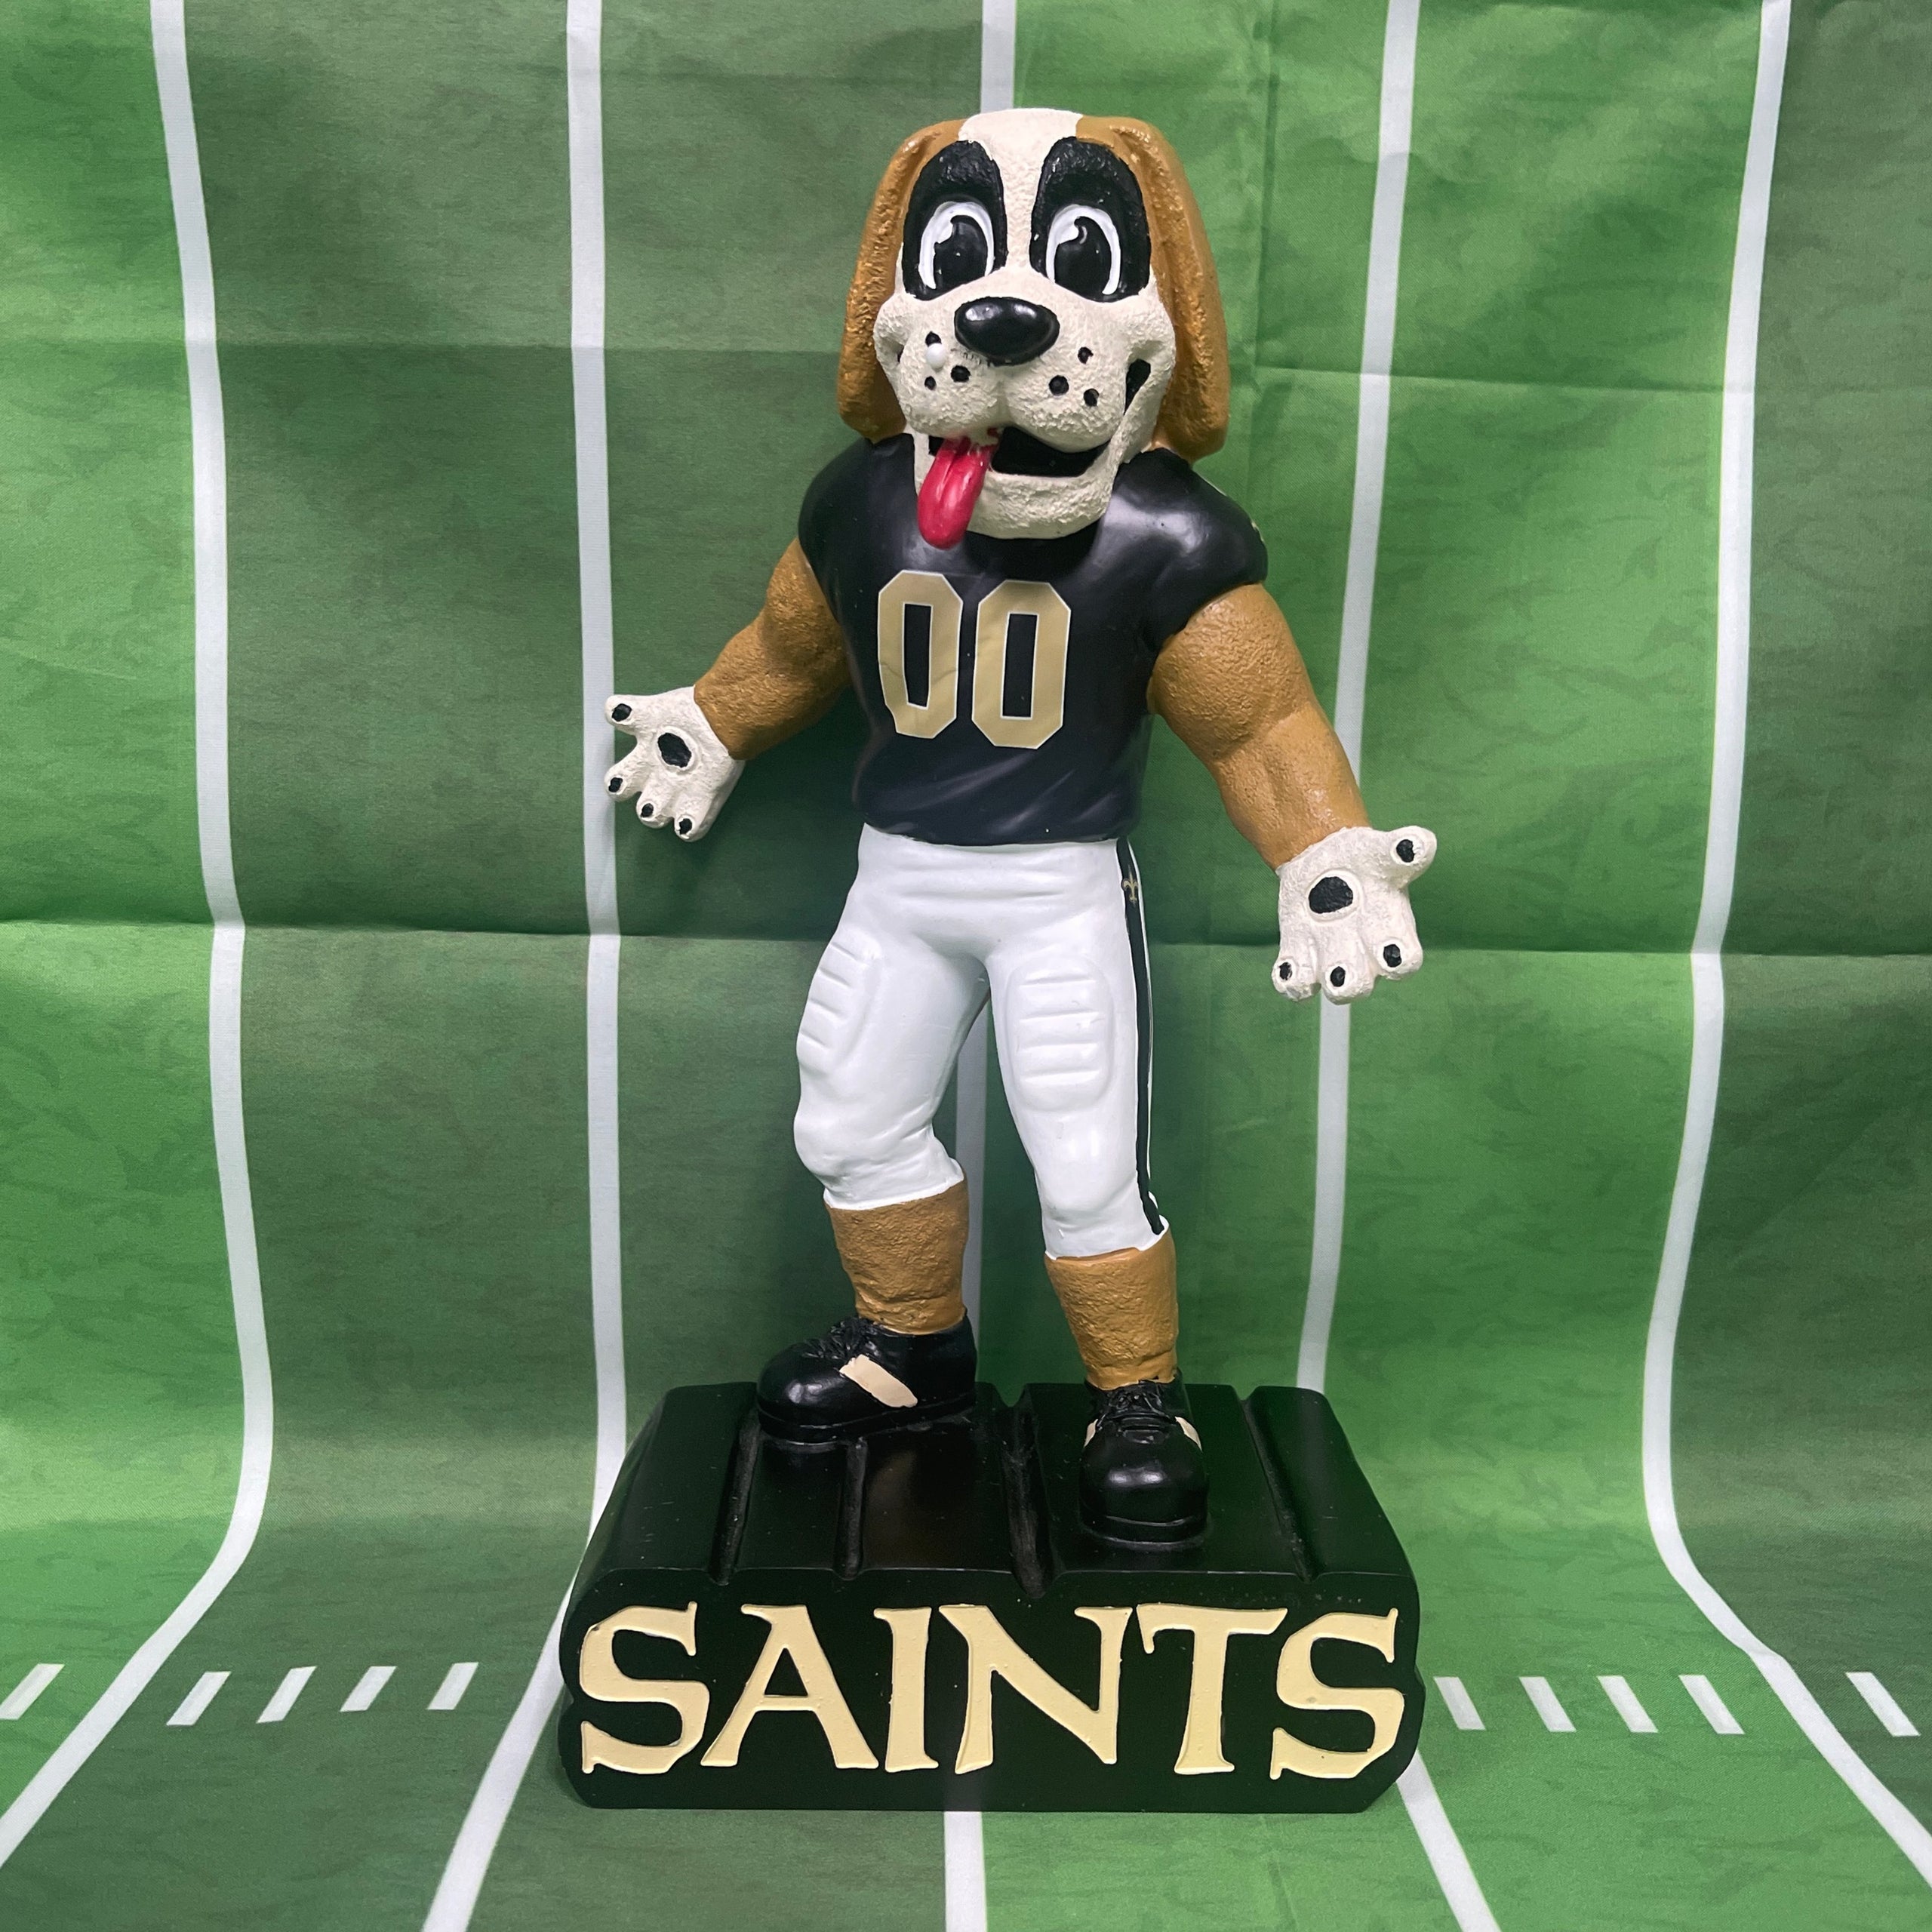 New Orleans Saints Jersey for Stuffed Animals